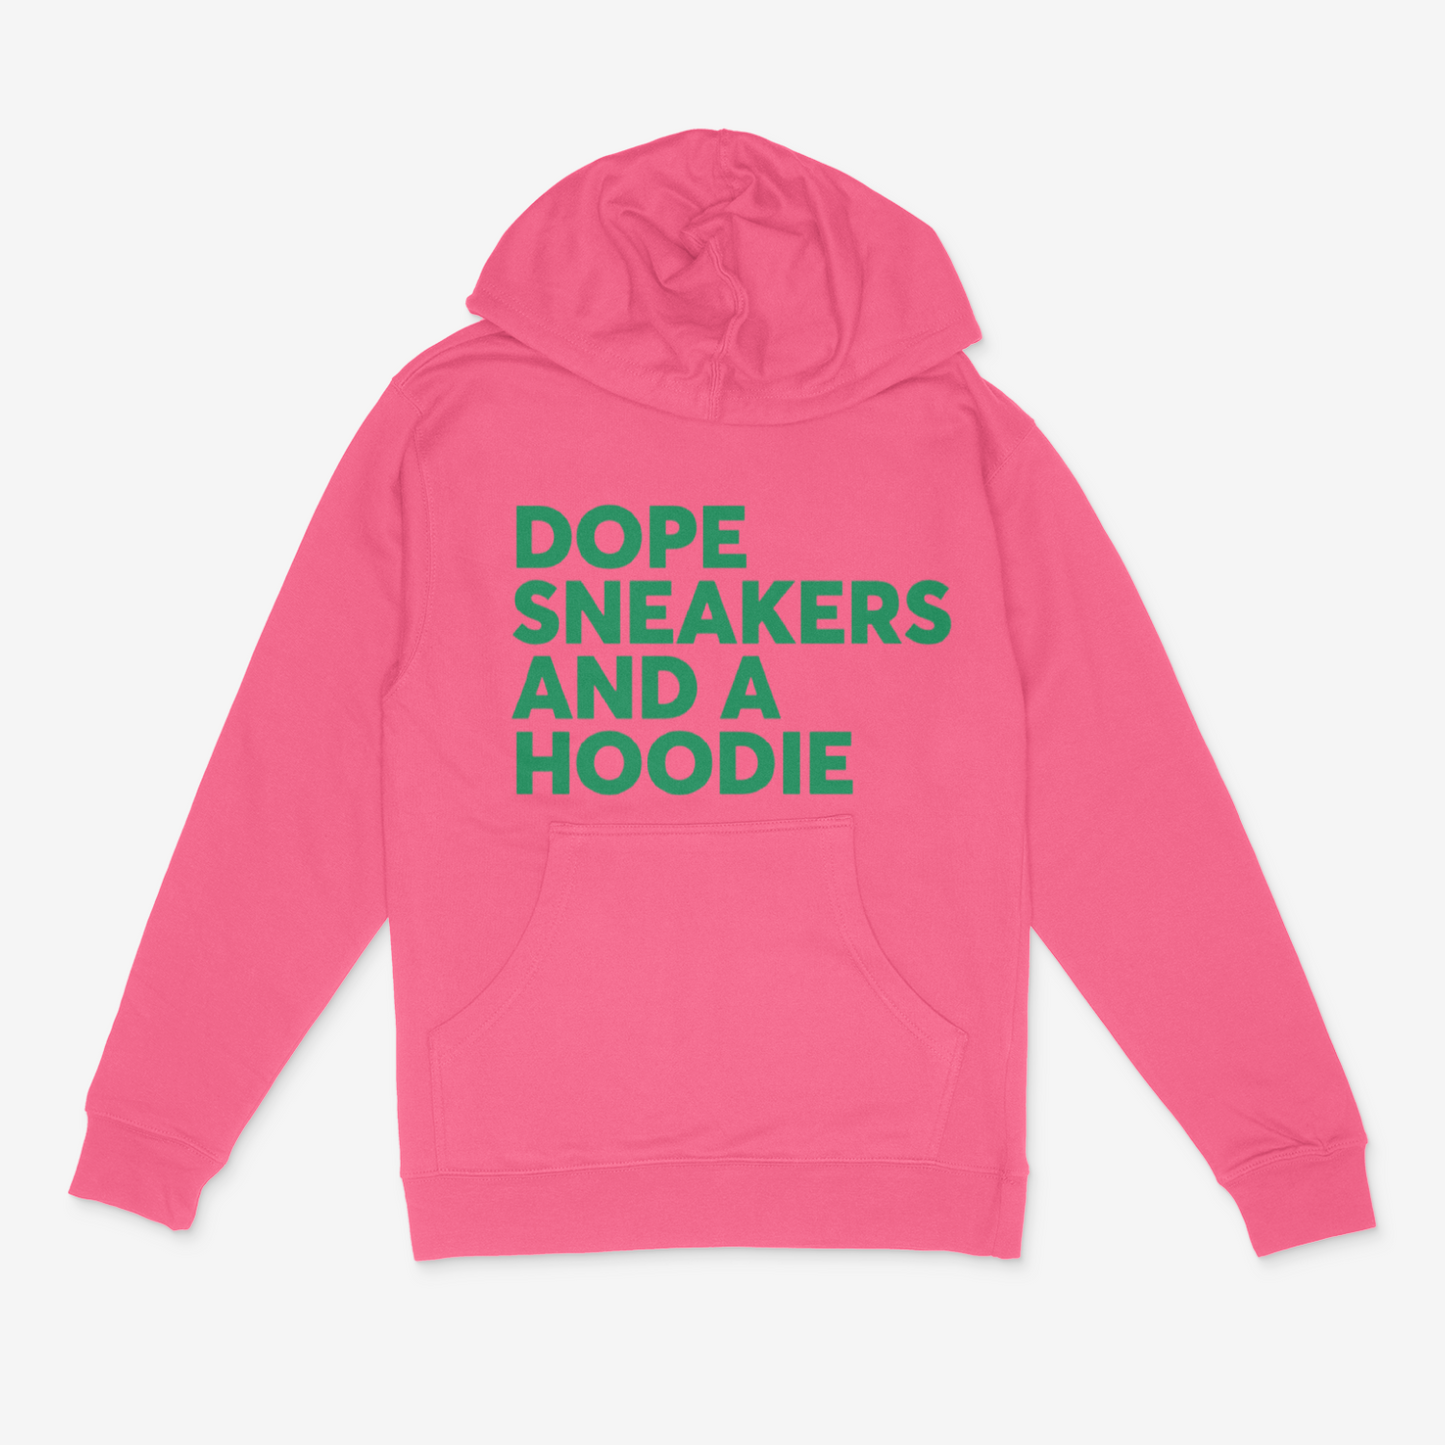 Dope Sneakers and A Hoodie (Green)